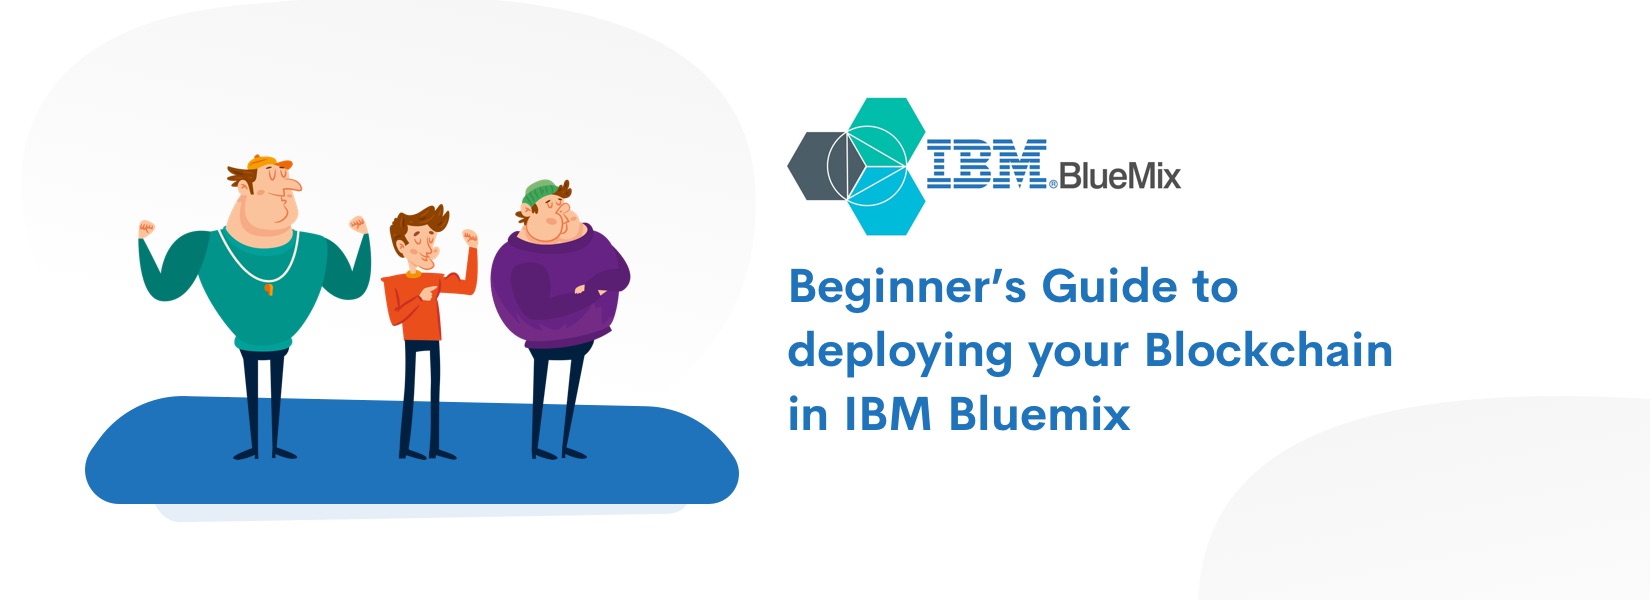 Beginner's Guide to deploying your Blockchain in IBM Bluemix